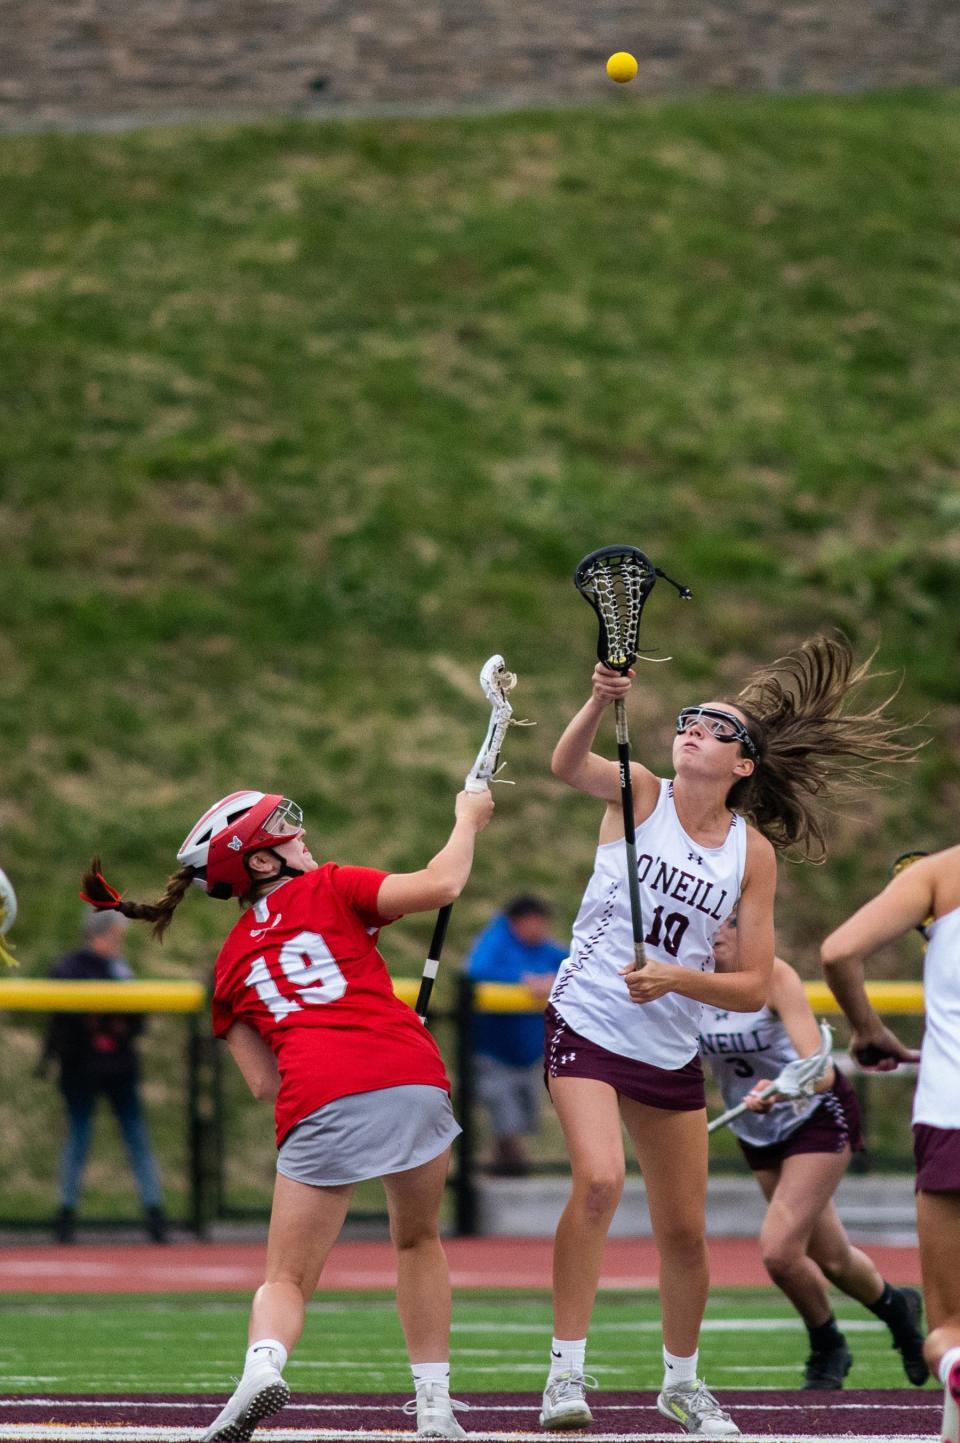 Red Hook's Yianna Giannoulis, left, and O'Neill's Bella Alberici, right, go for the ball on a draw during the Section 9 Class D girls lacrosse final on May 26, 2022.